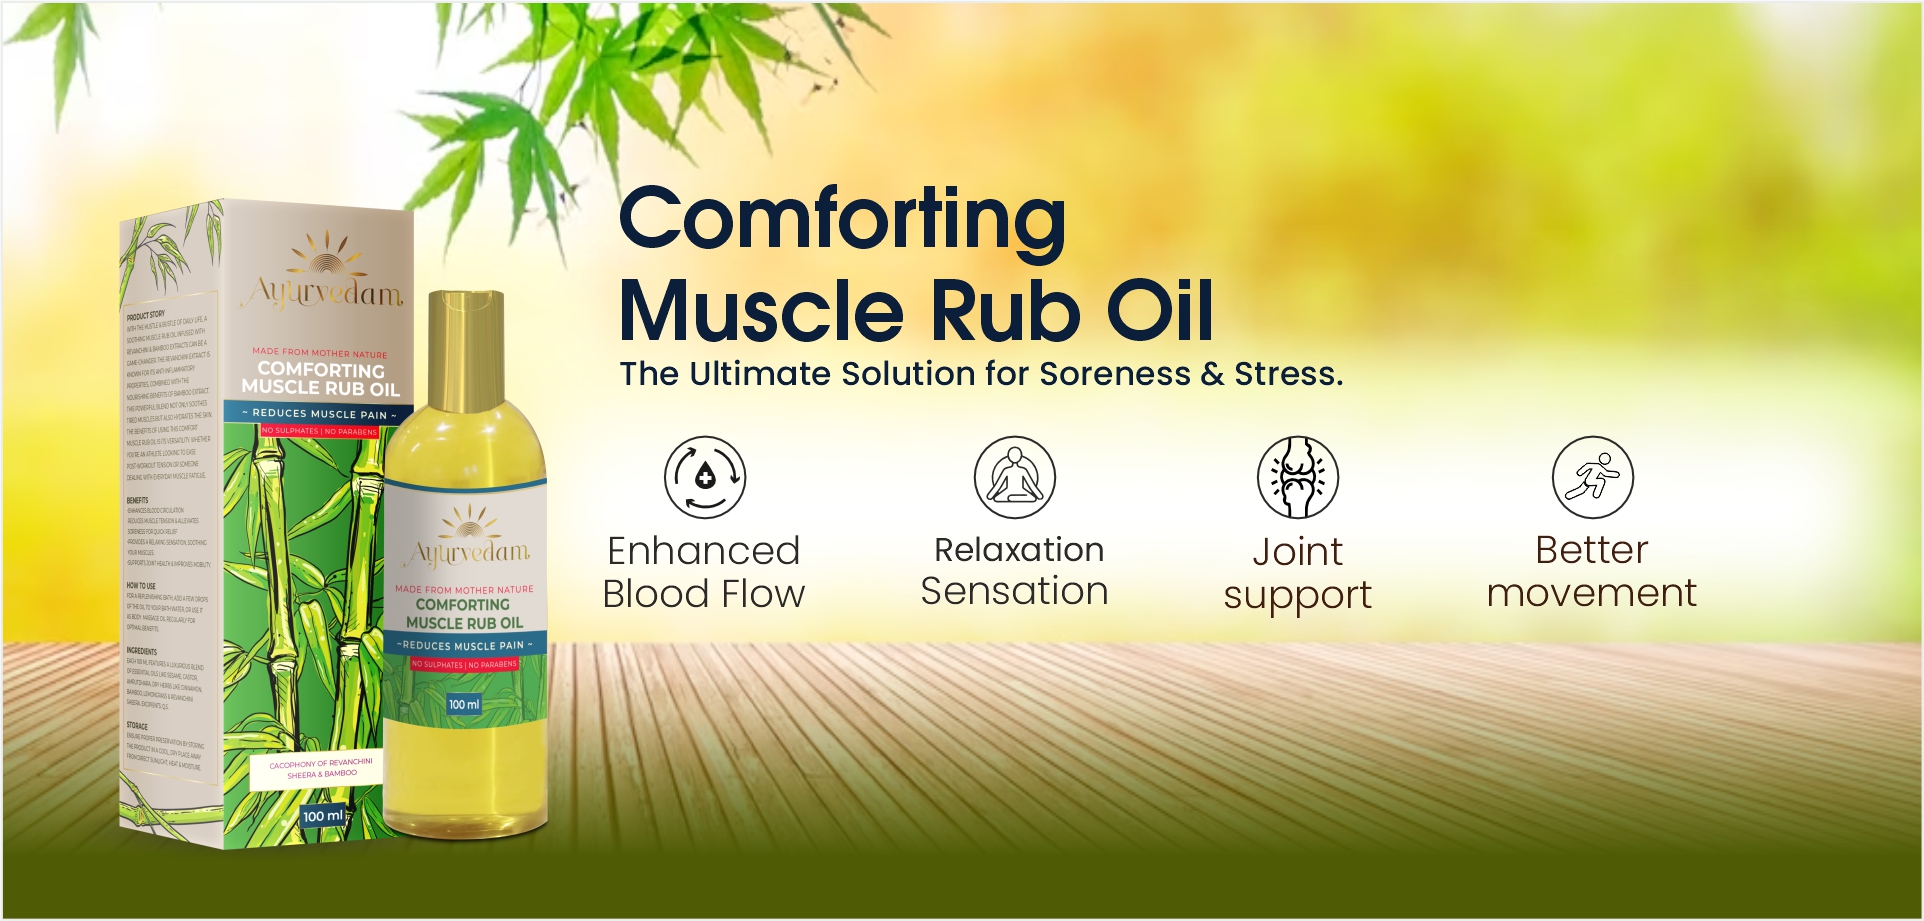 Ayurvedam Comforting Muscle Rub Oil Banner with it's benefits Listed